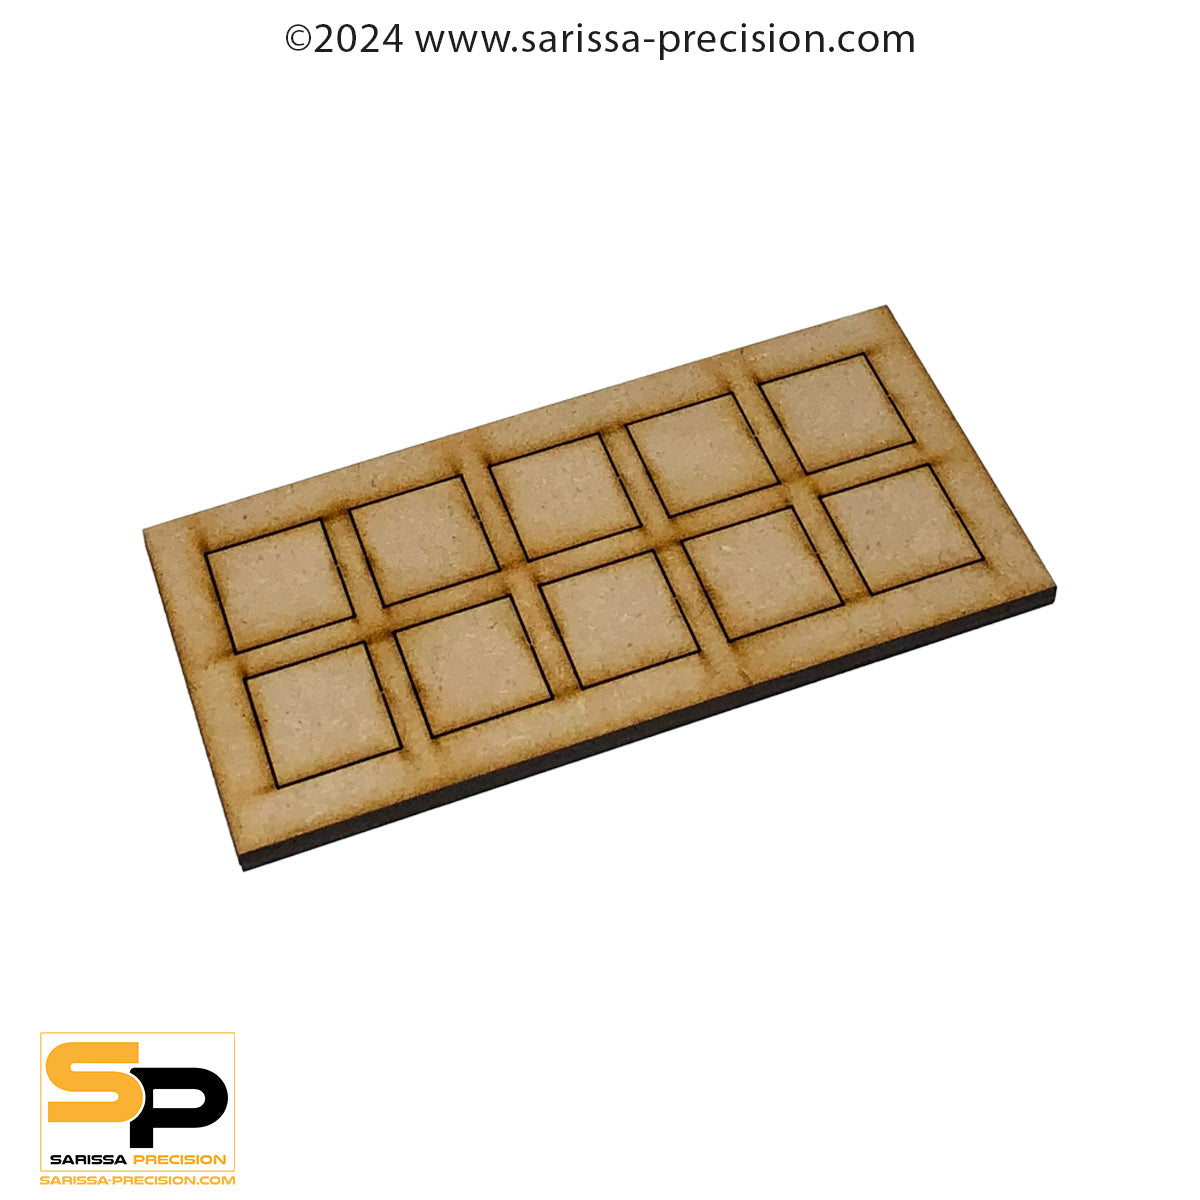 15x10 25x25mm Conversion Tray for 20x20mm bases